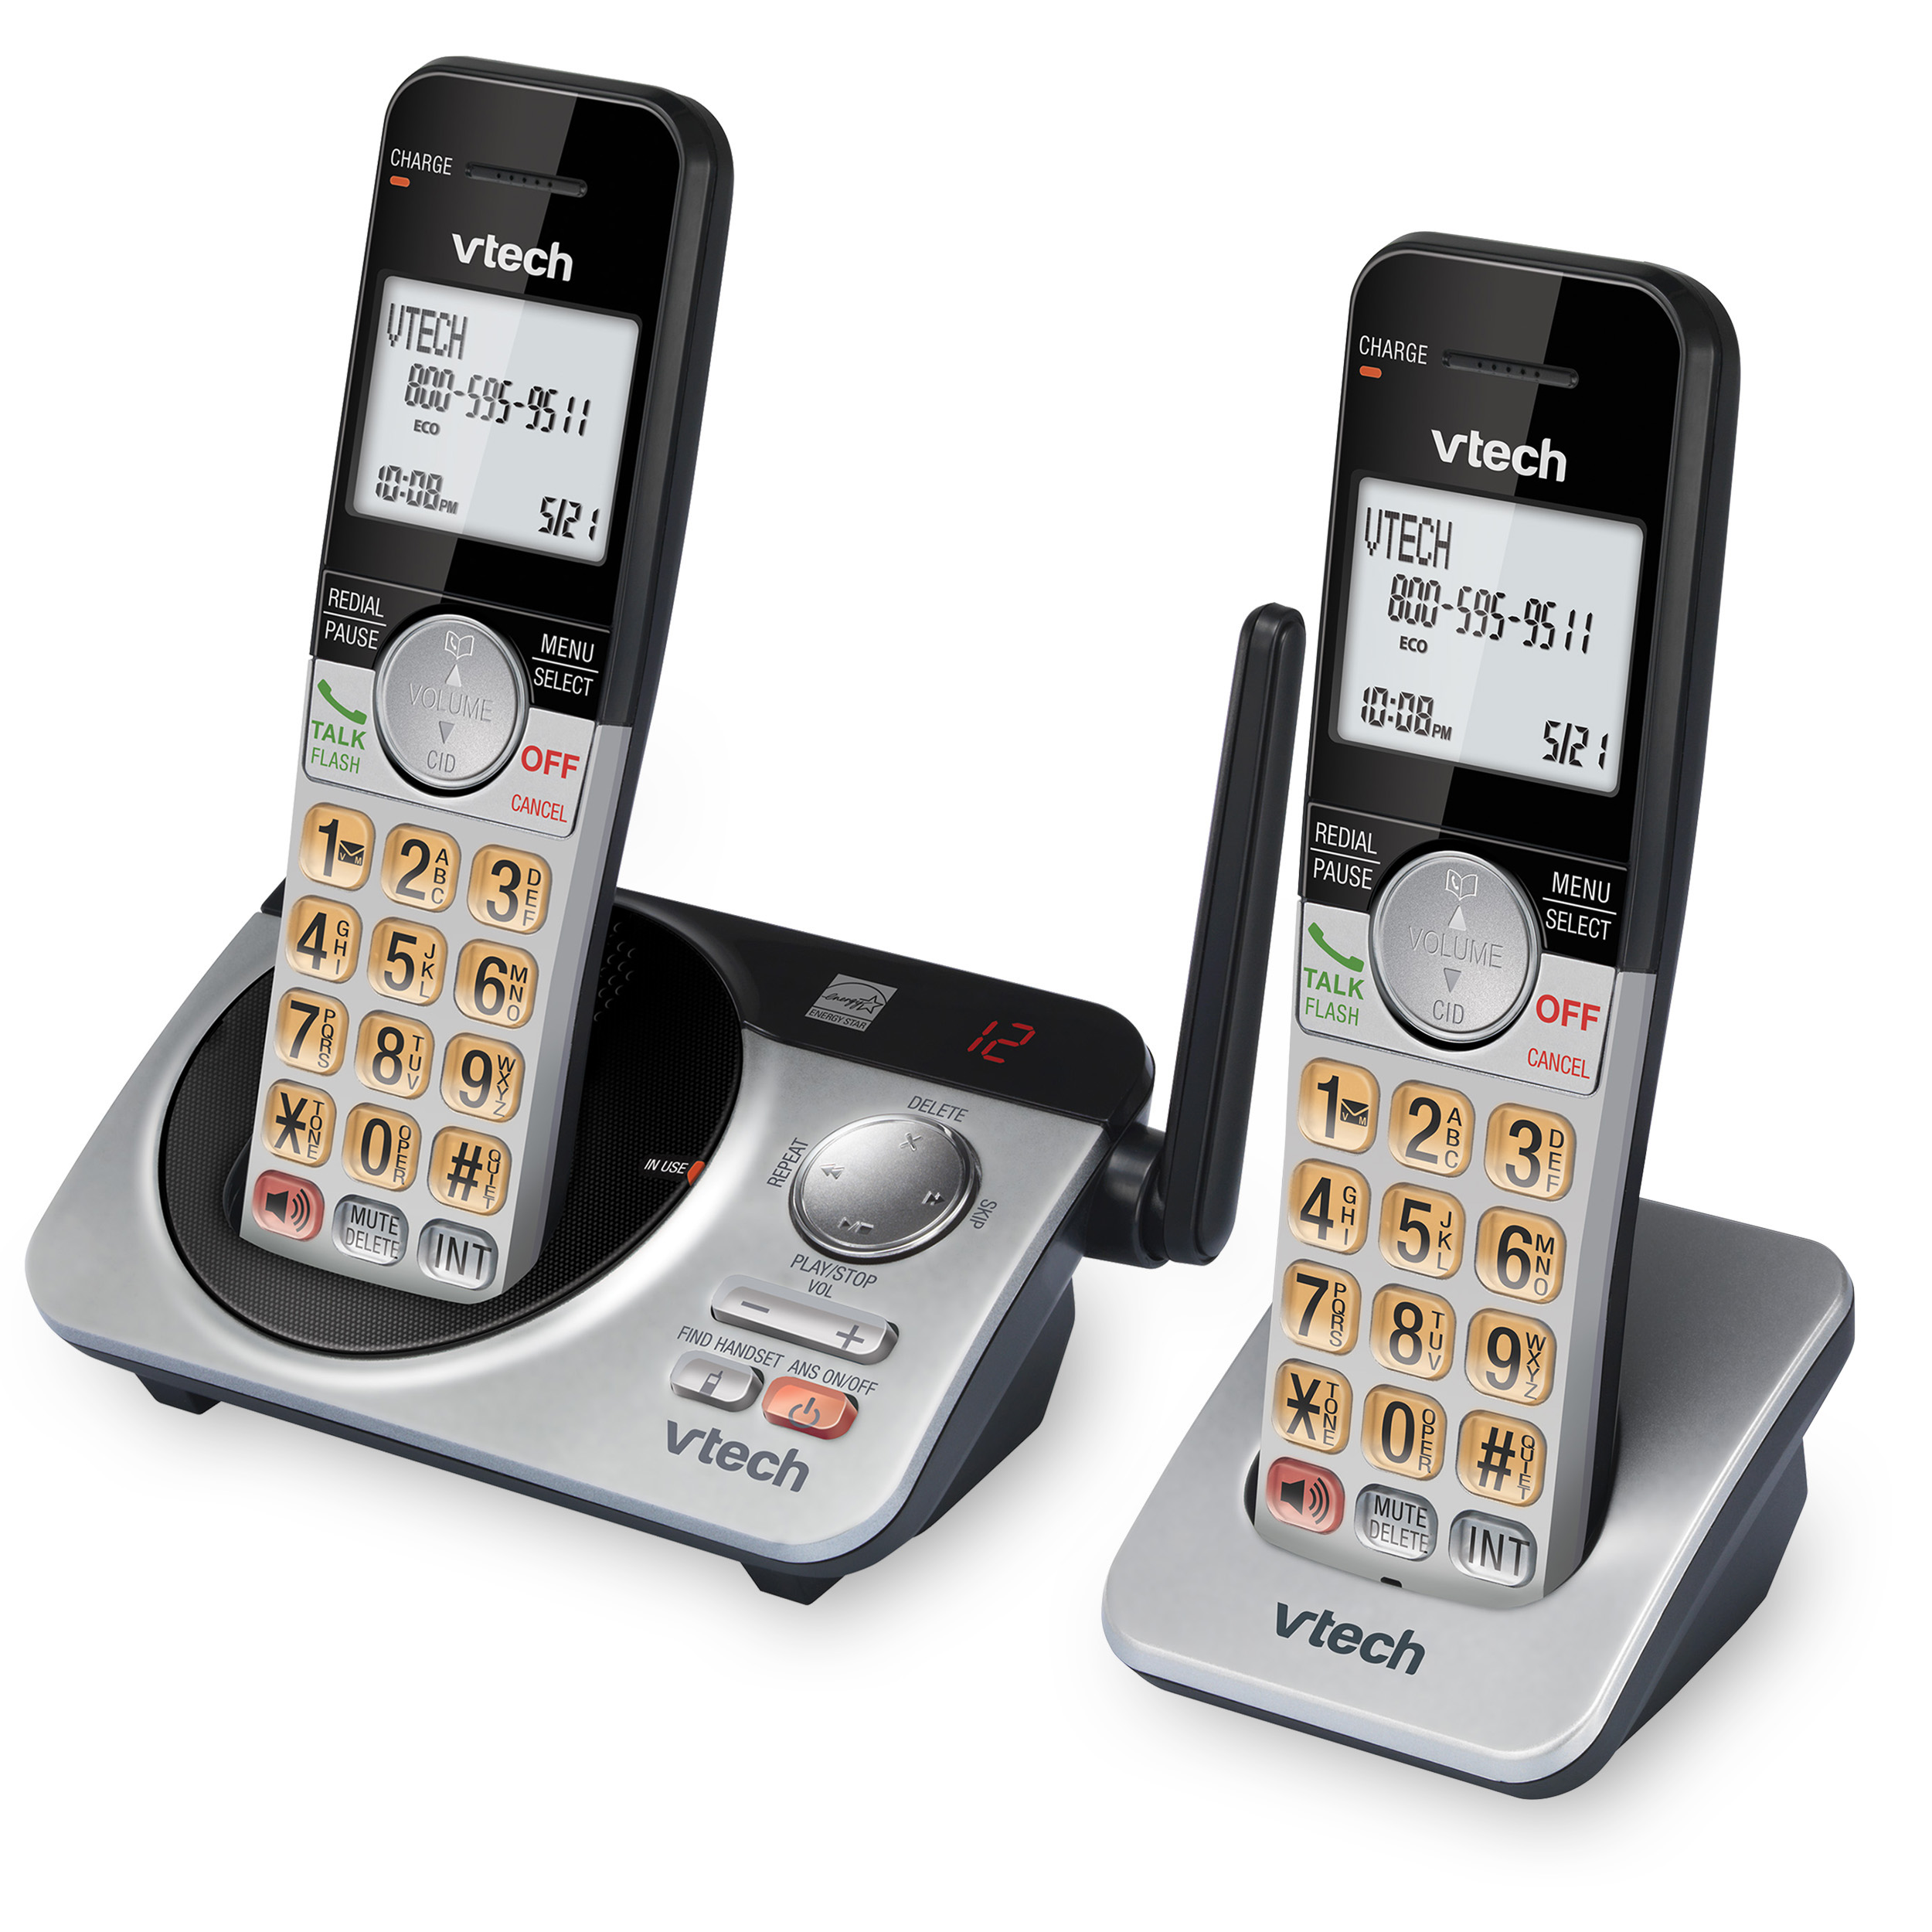 VTech CS5229-2 2 Handset Extended Range DECT 6.0 Cordless Phone with Answering System (Silver/Black) - image 3 of 18